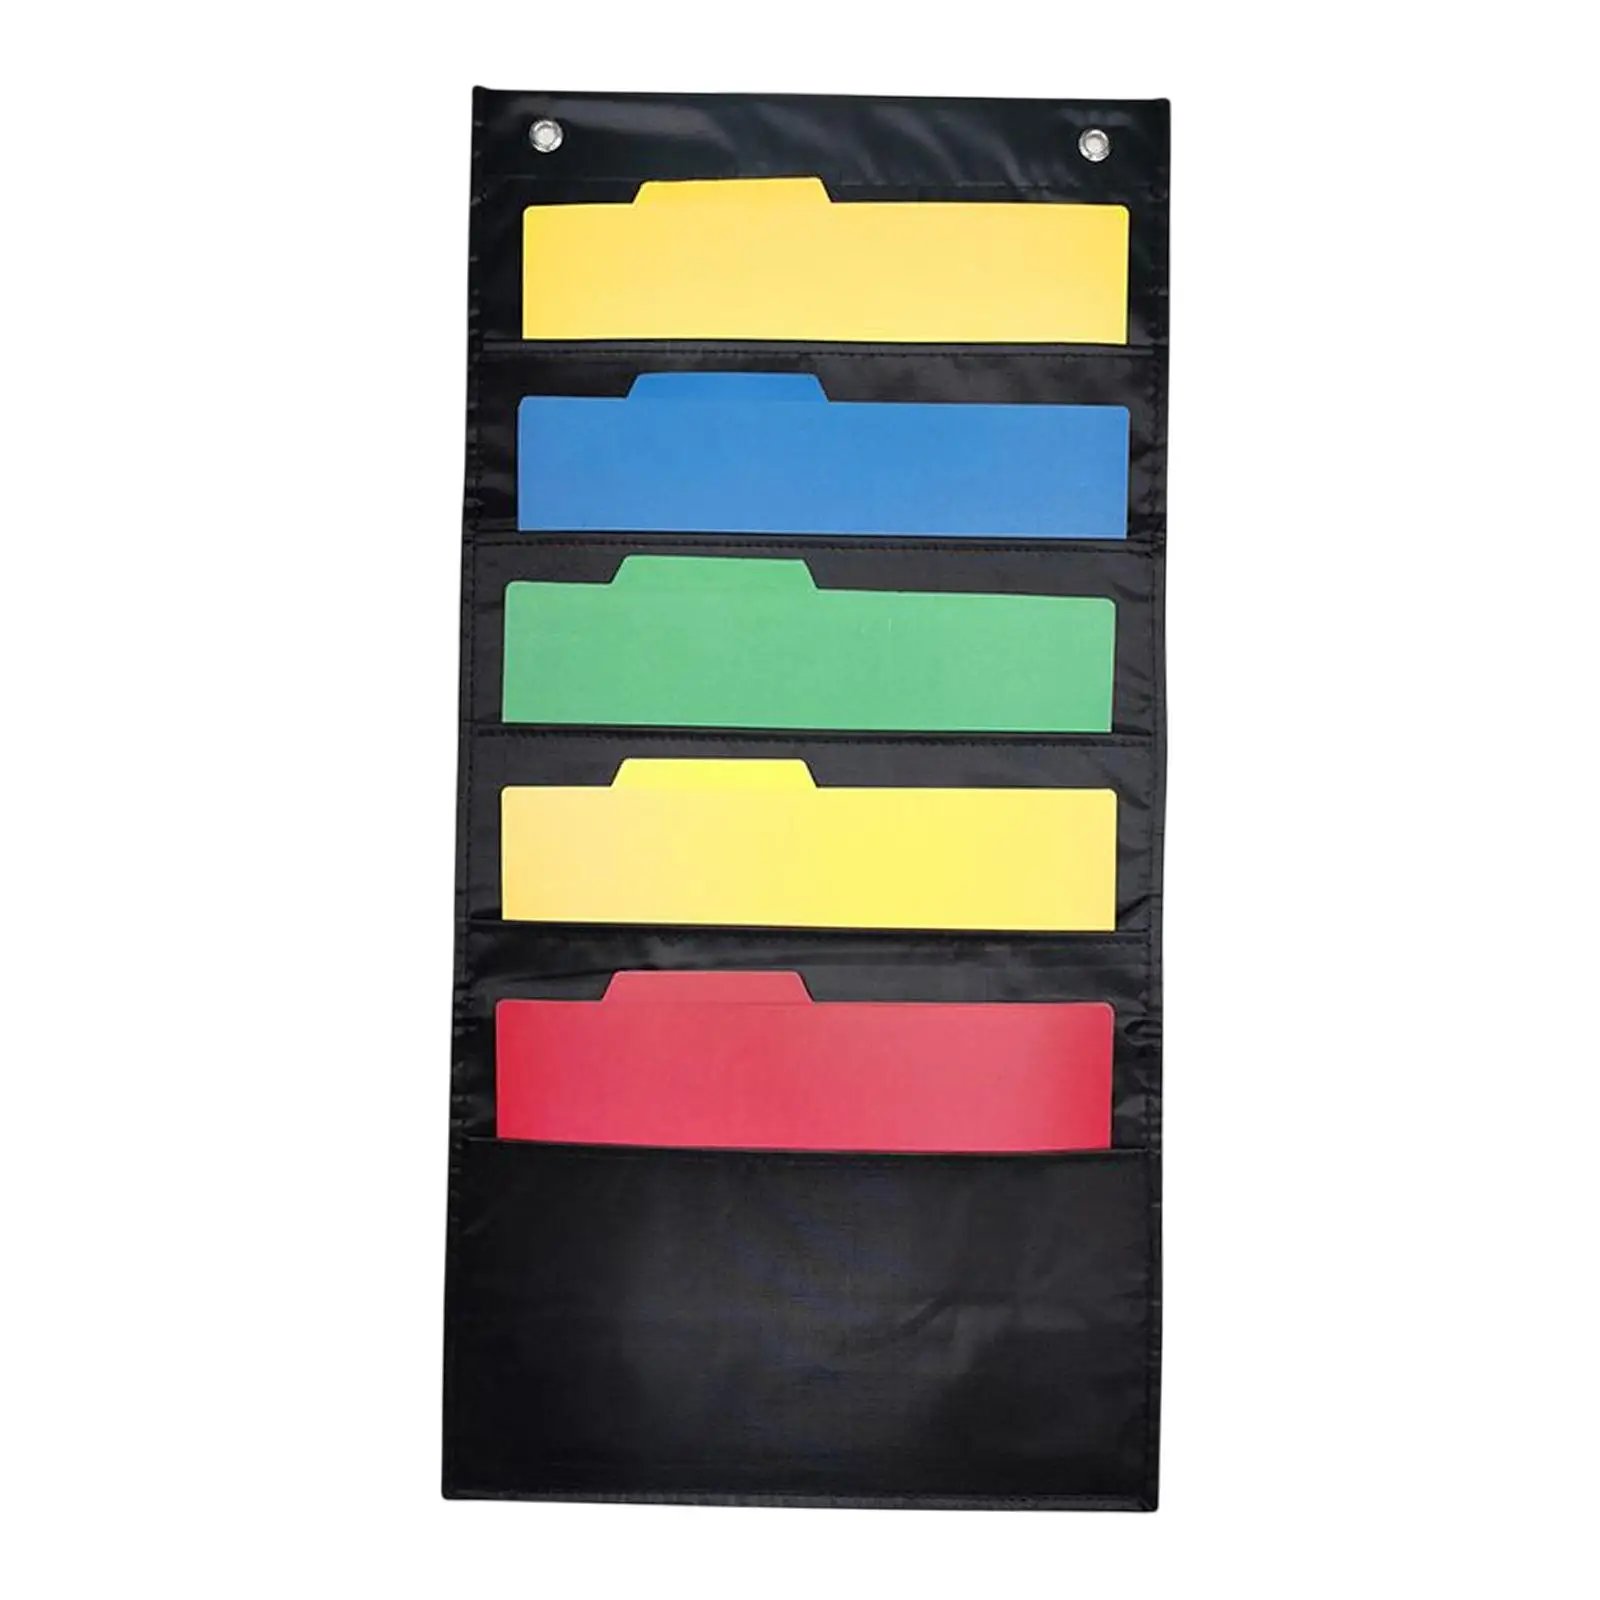 Hanging Daily Schedule Pocket Chart File Organizer Storage Bag 5 Pockets for